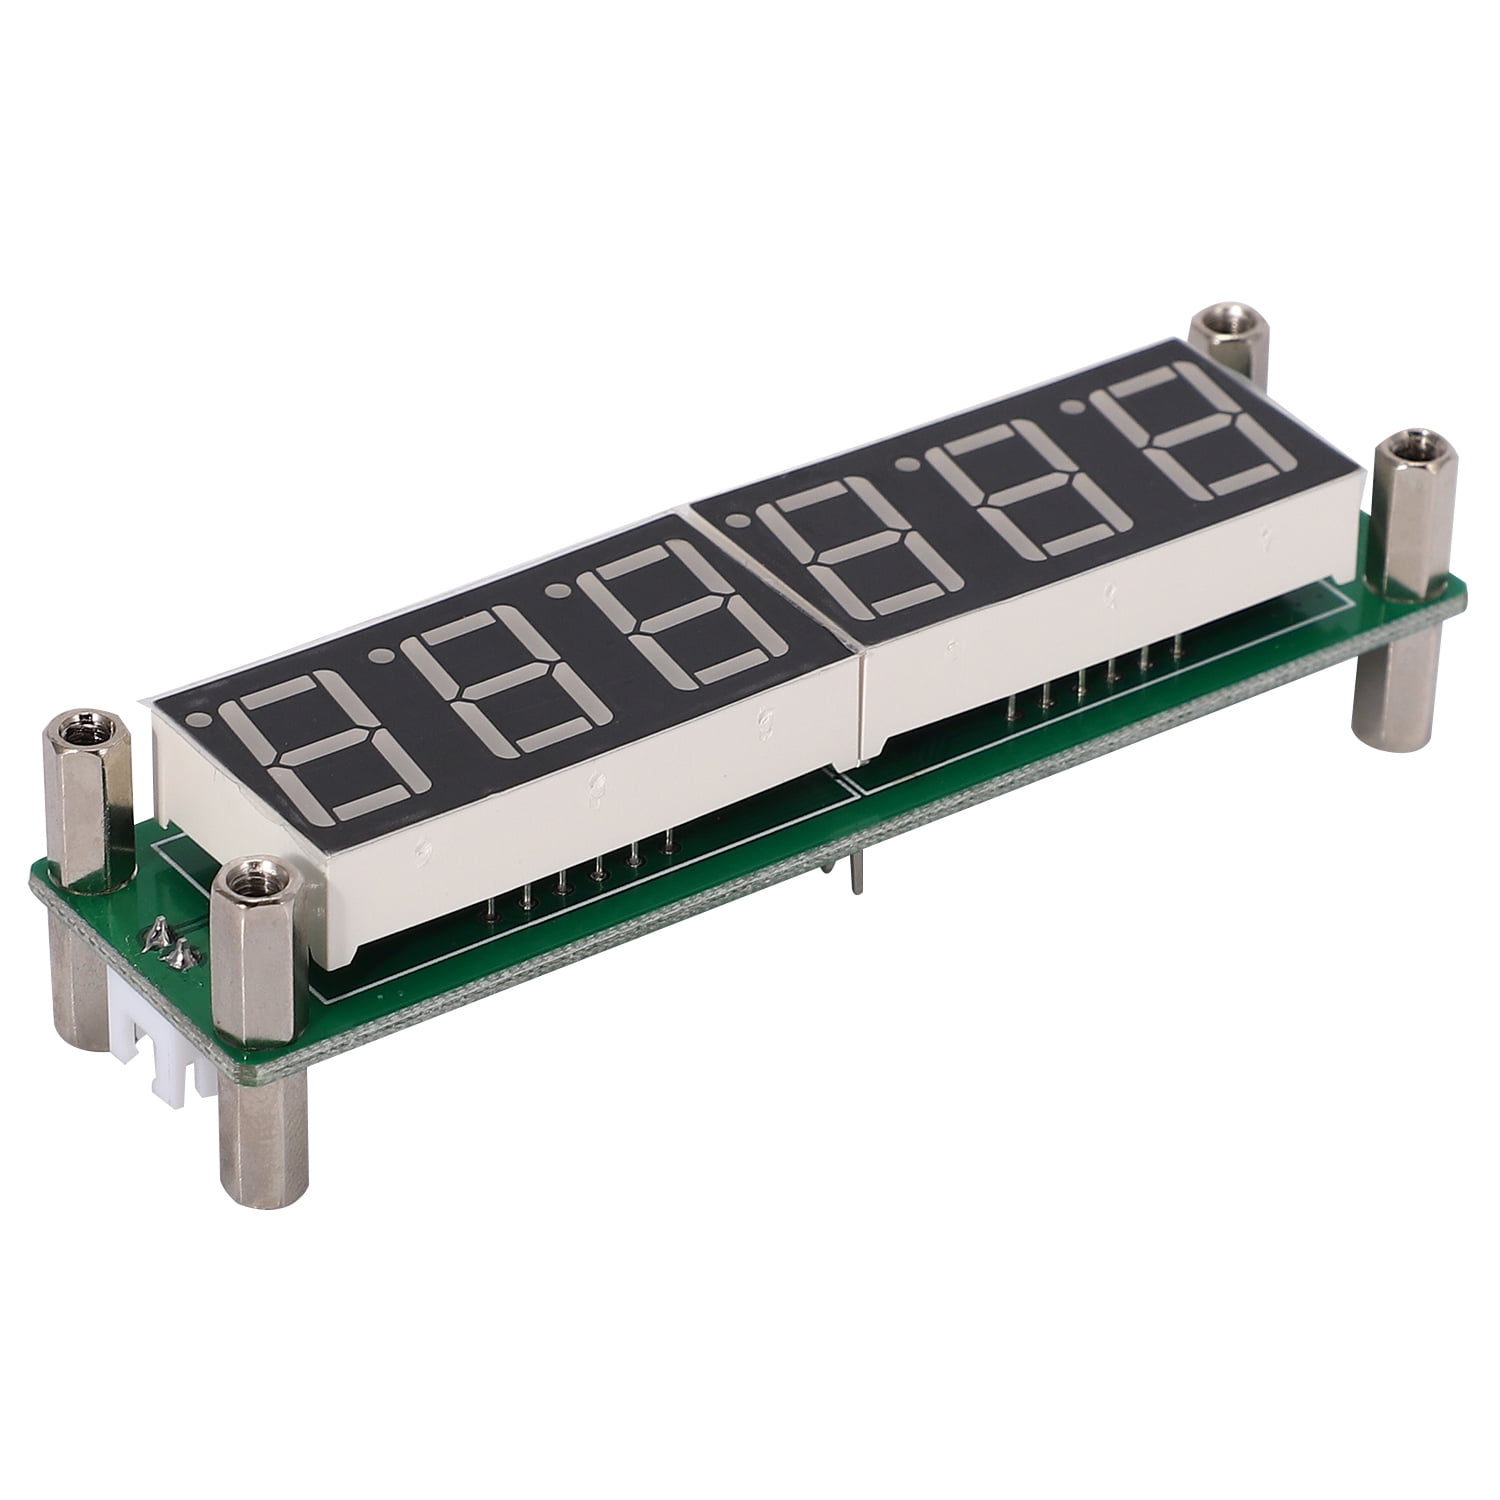 PLJ-6LED-A Frequency Counter Frequency Display Component Measurement Module 